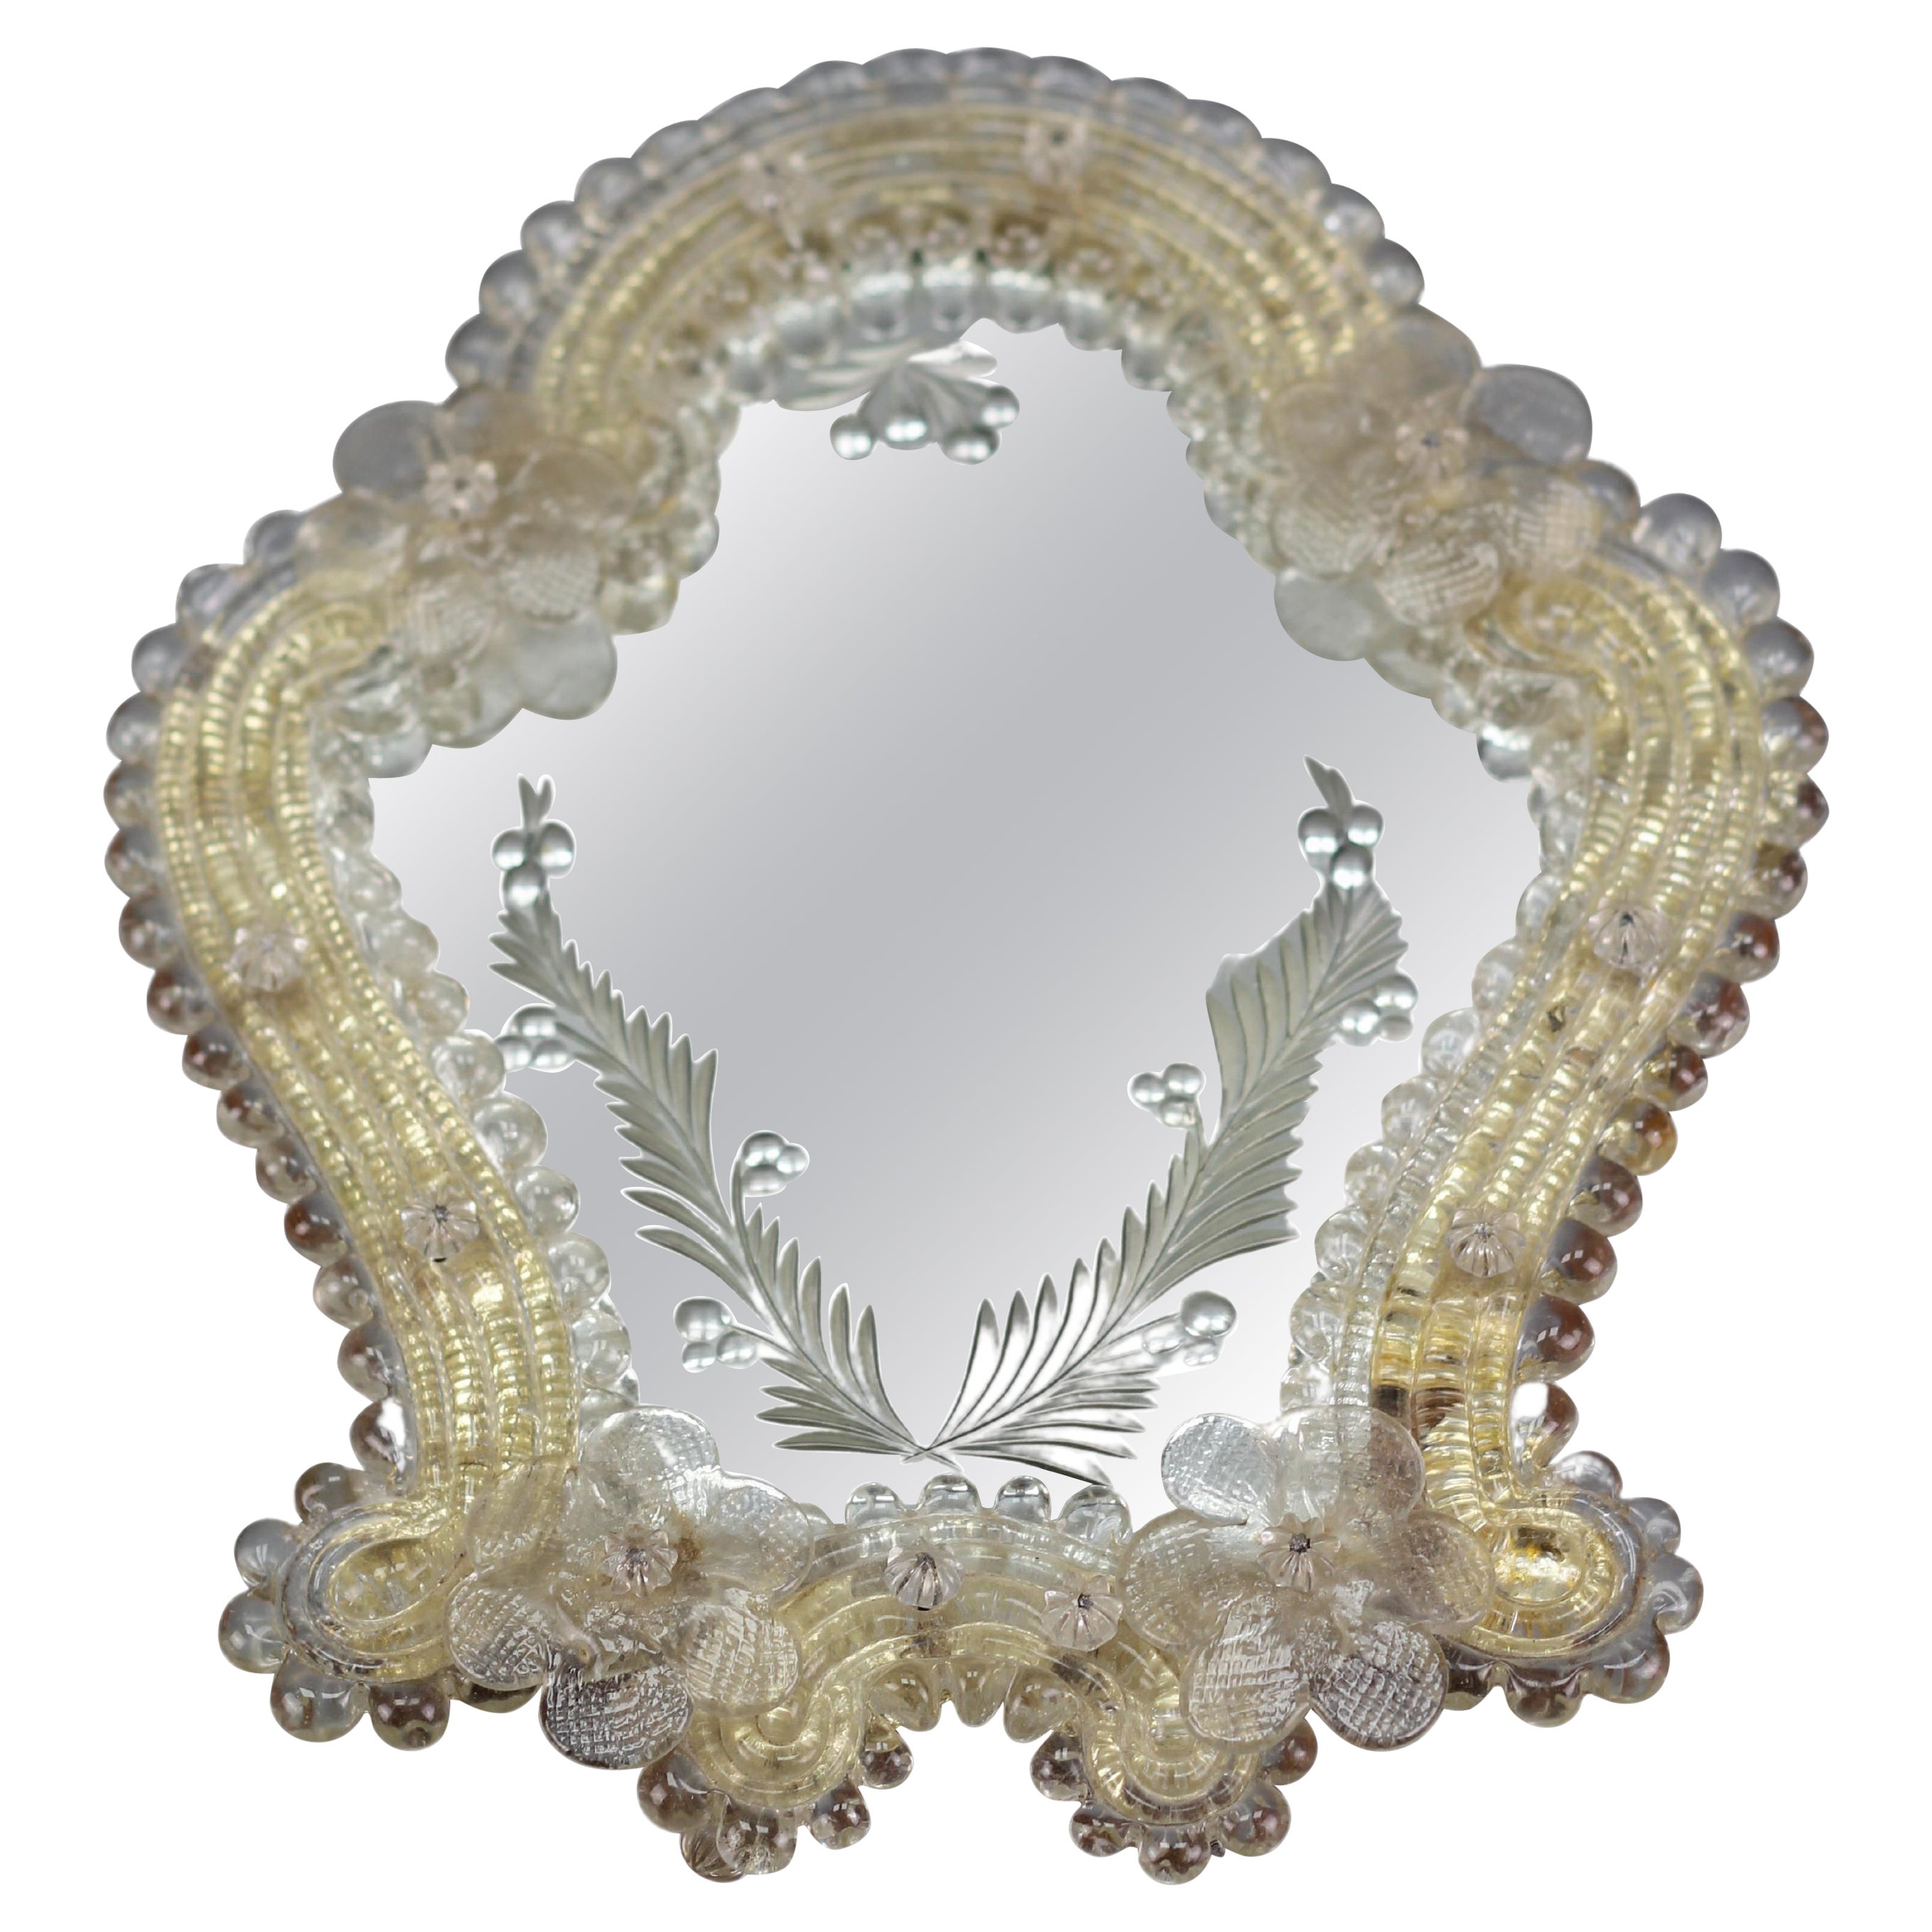 Italian Murano Clear and Light Golden Glass Etched Wall Mirror, circa 1950s For Sale